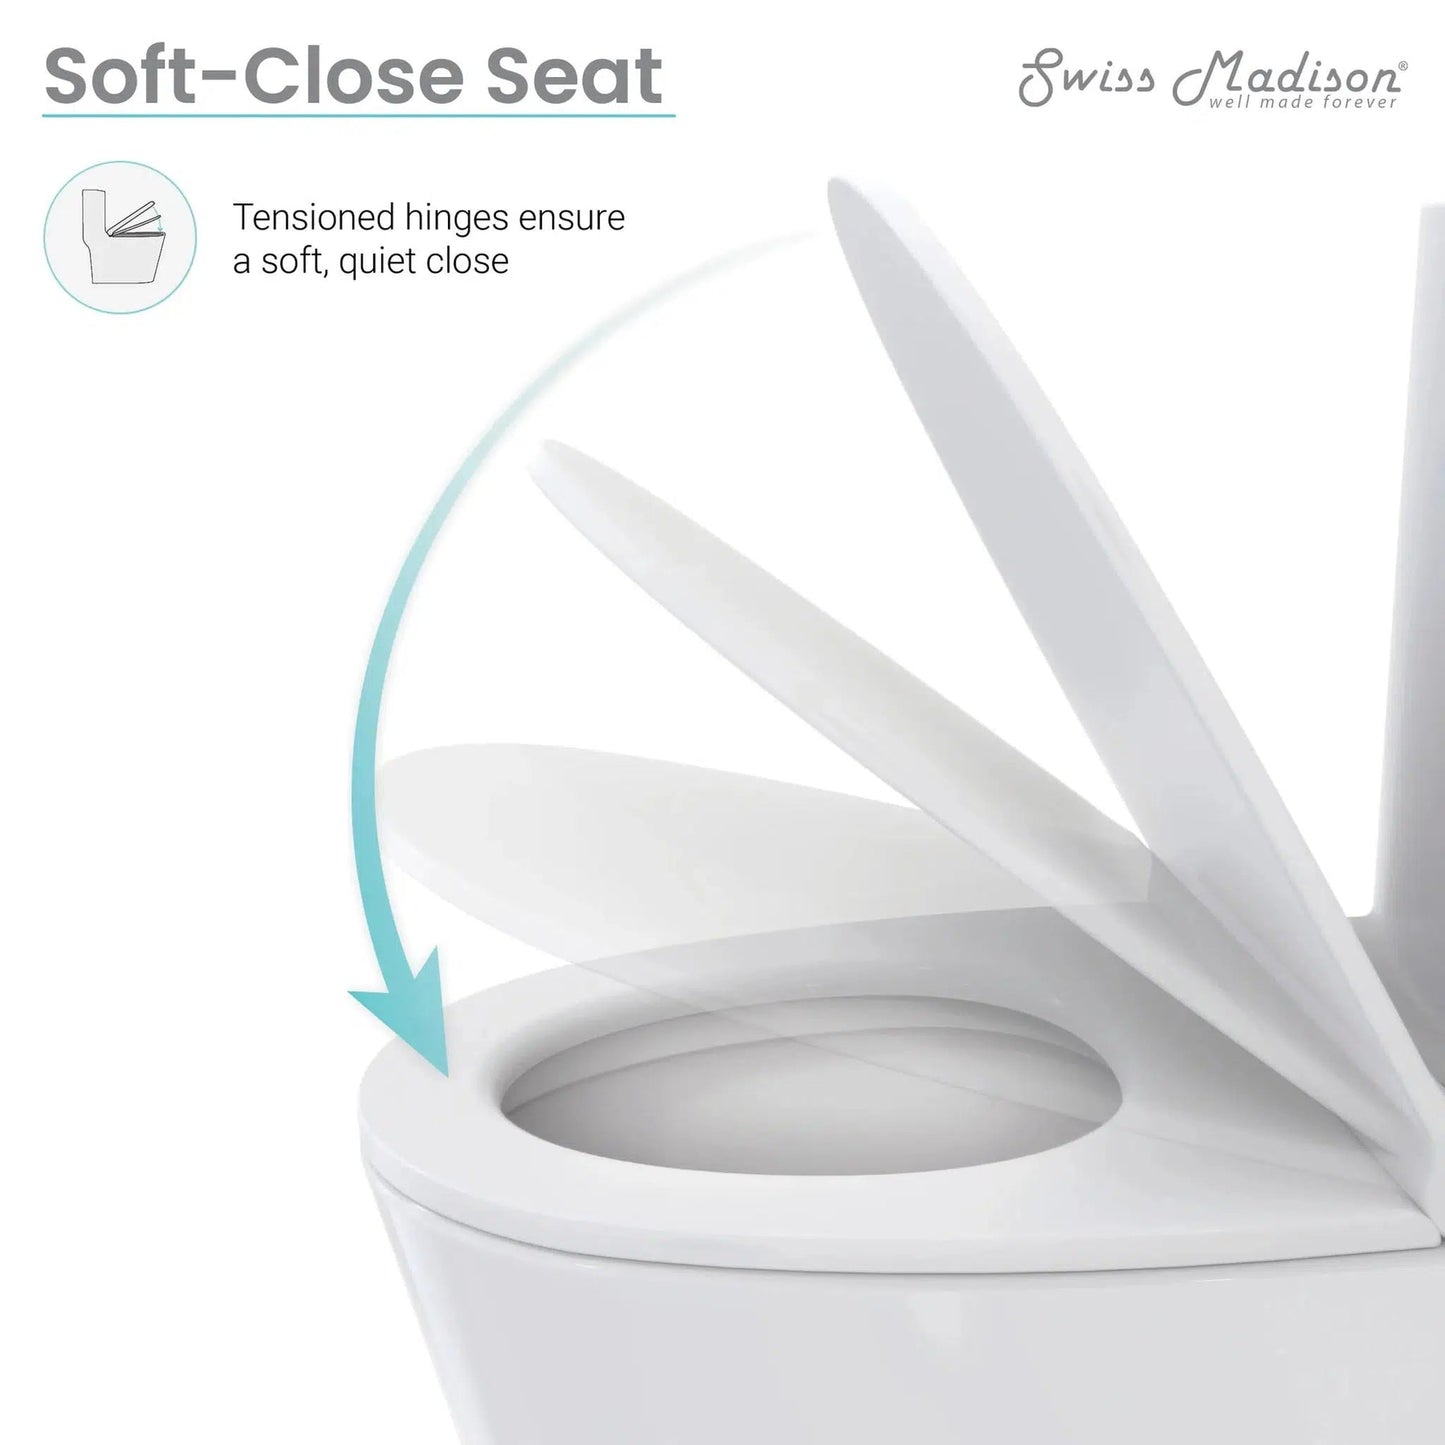 Swiss Madison Sublime II 13" x 27" Glossy White One-Piece Round Floor Mounted Toilet With 12" Rough-In Valve and 1.1/1.6 GPF Dual-Flush Function